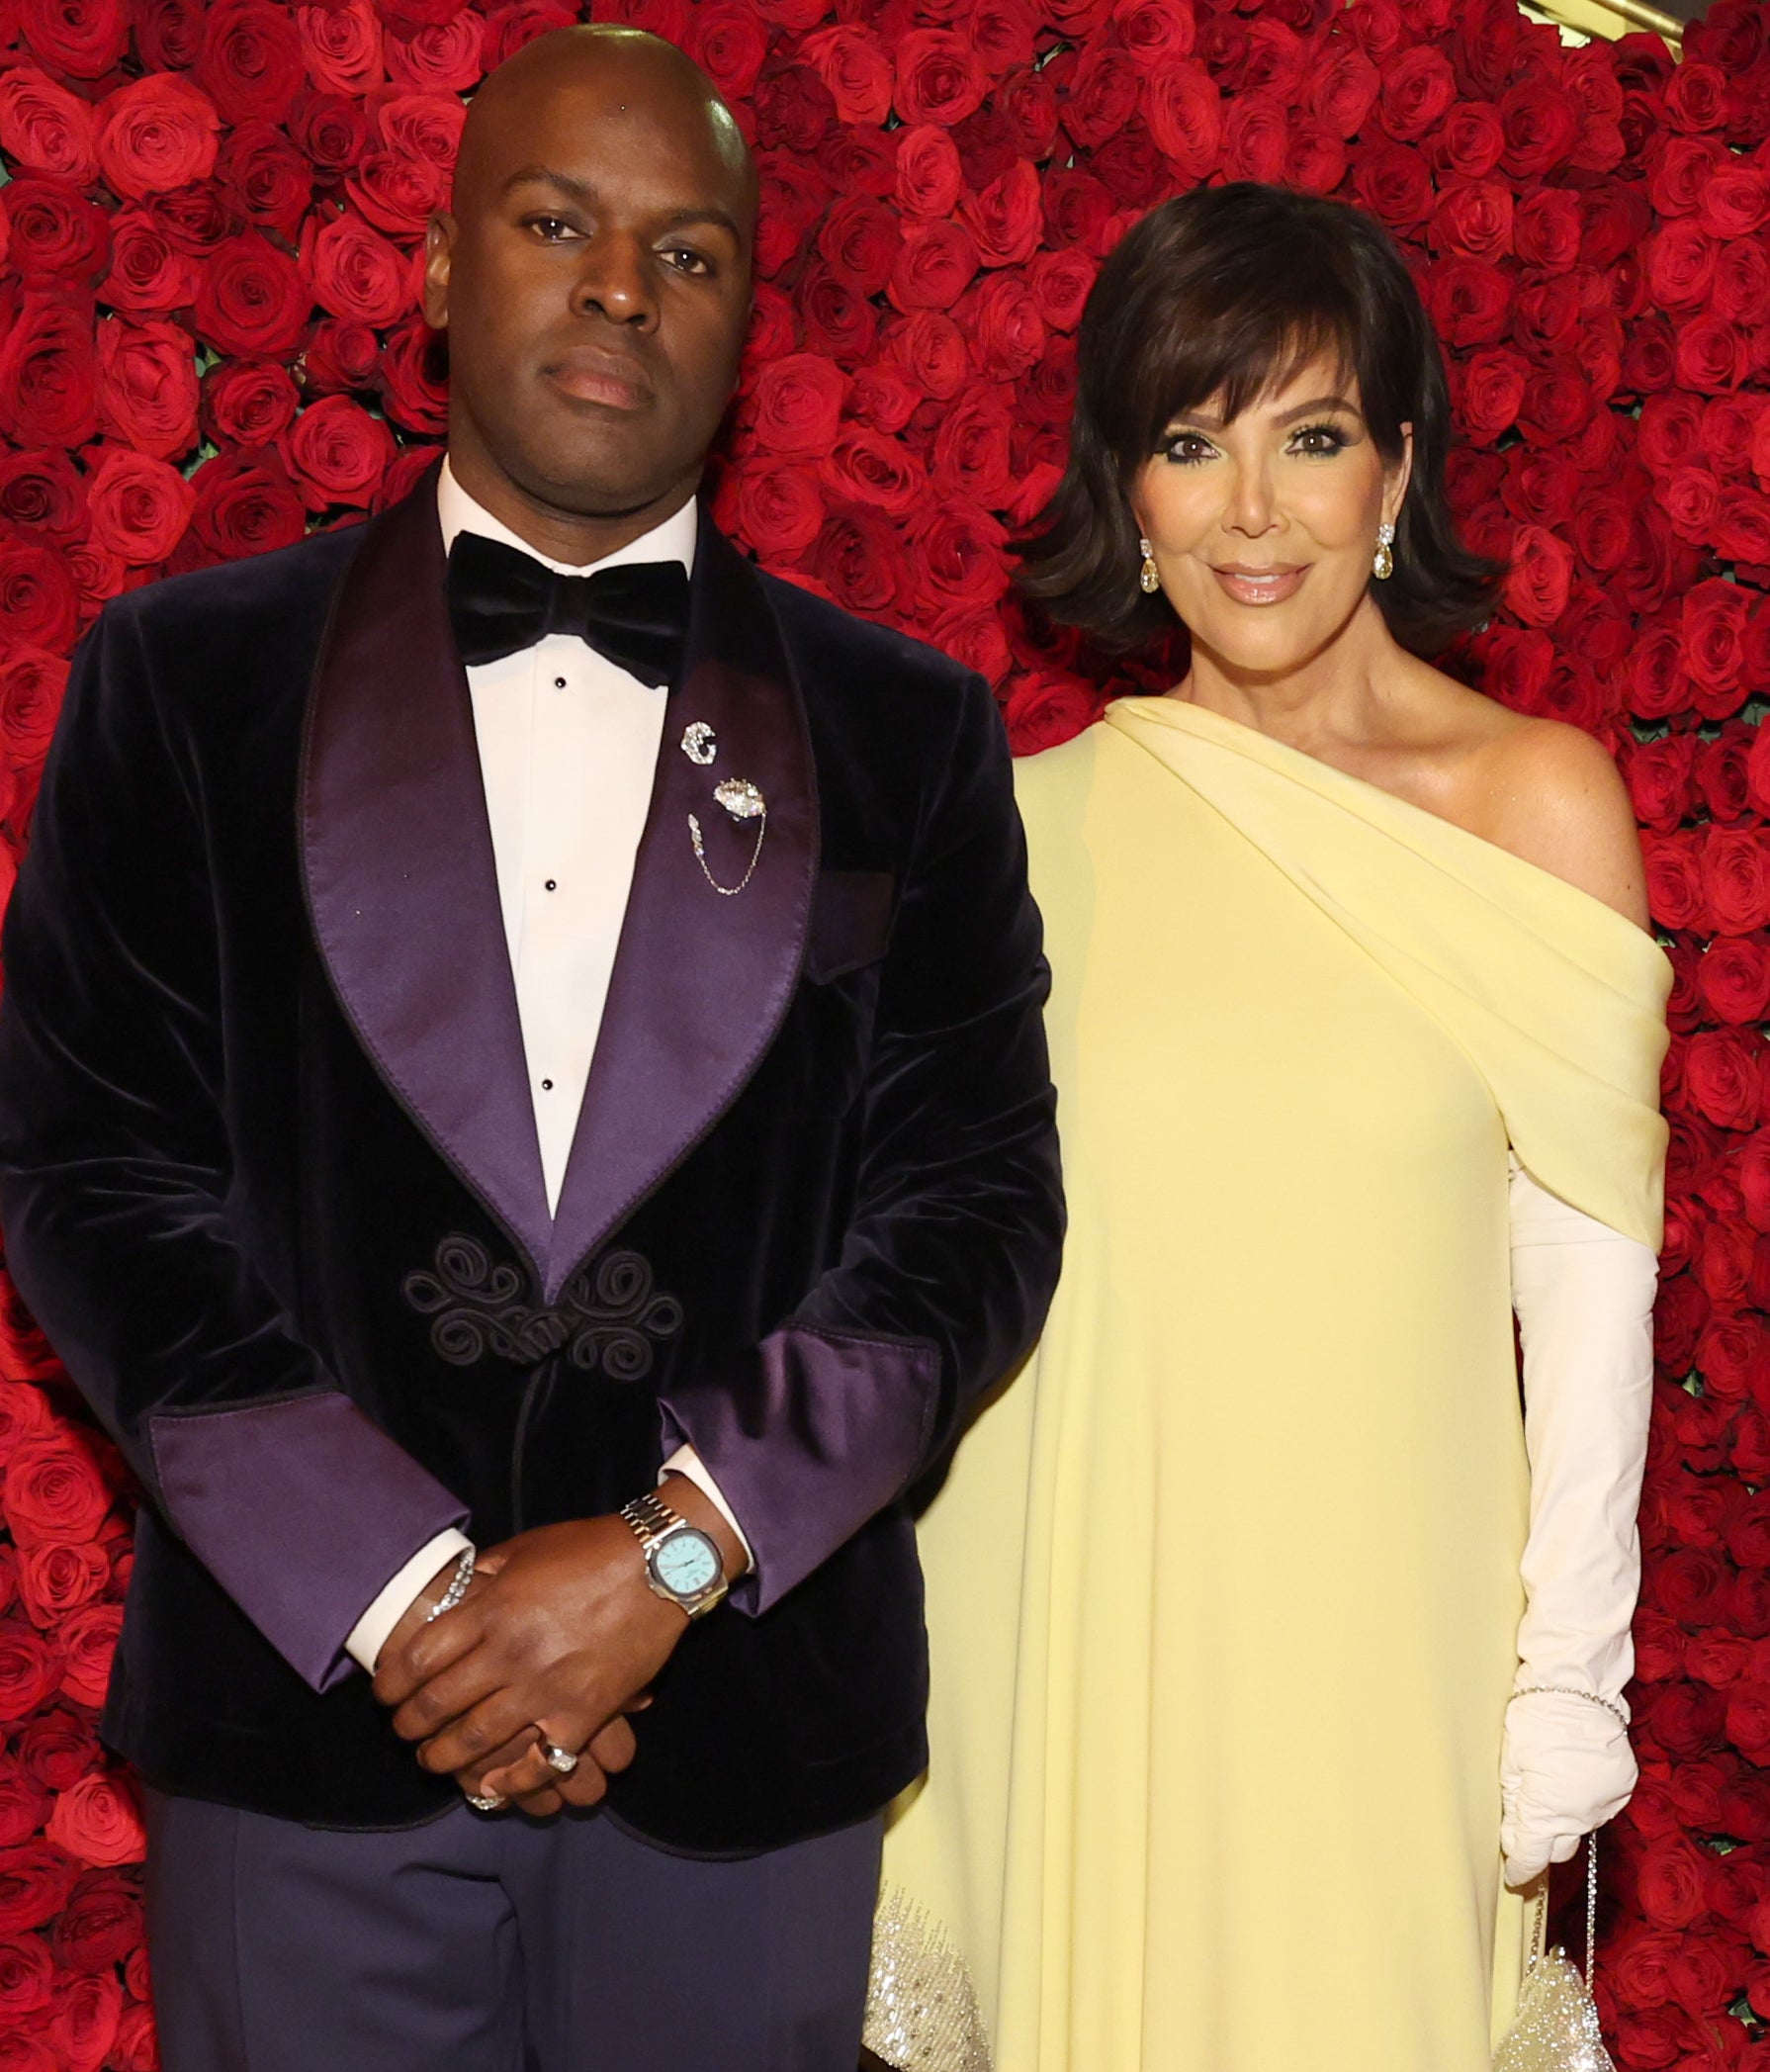 Two celebrities pose together; one in a velvet tuxedo and the other in a one-shoulder gown